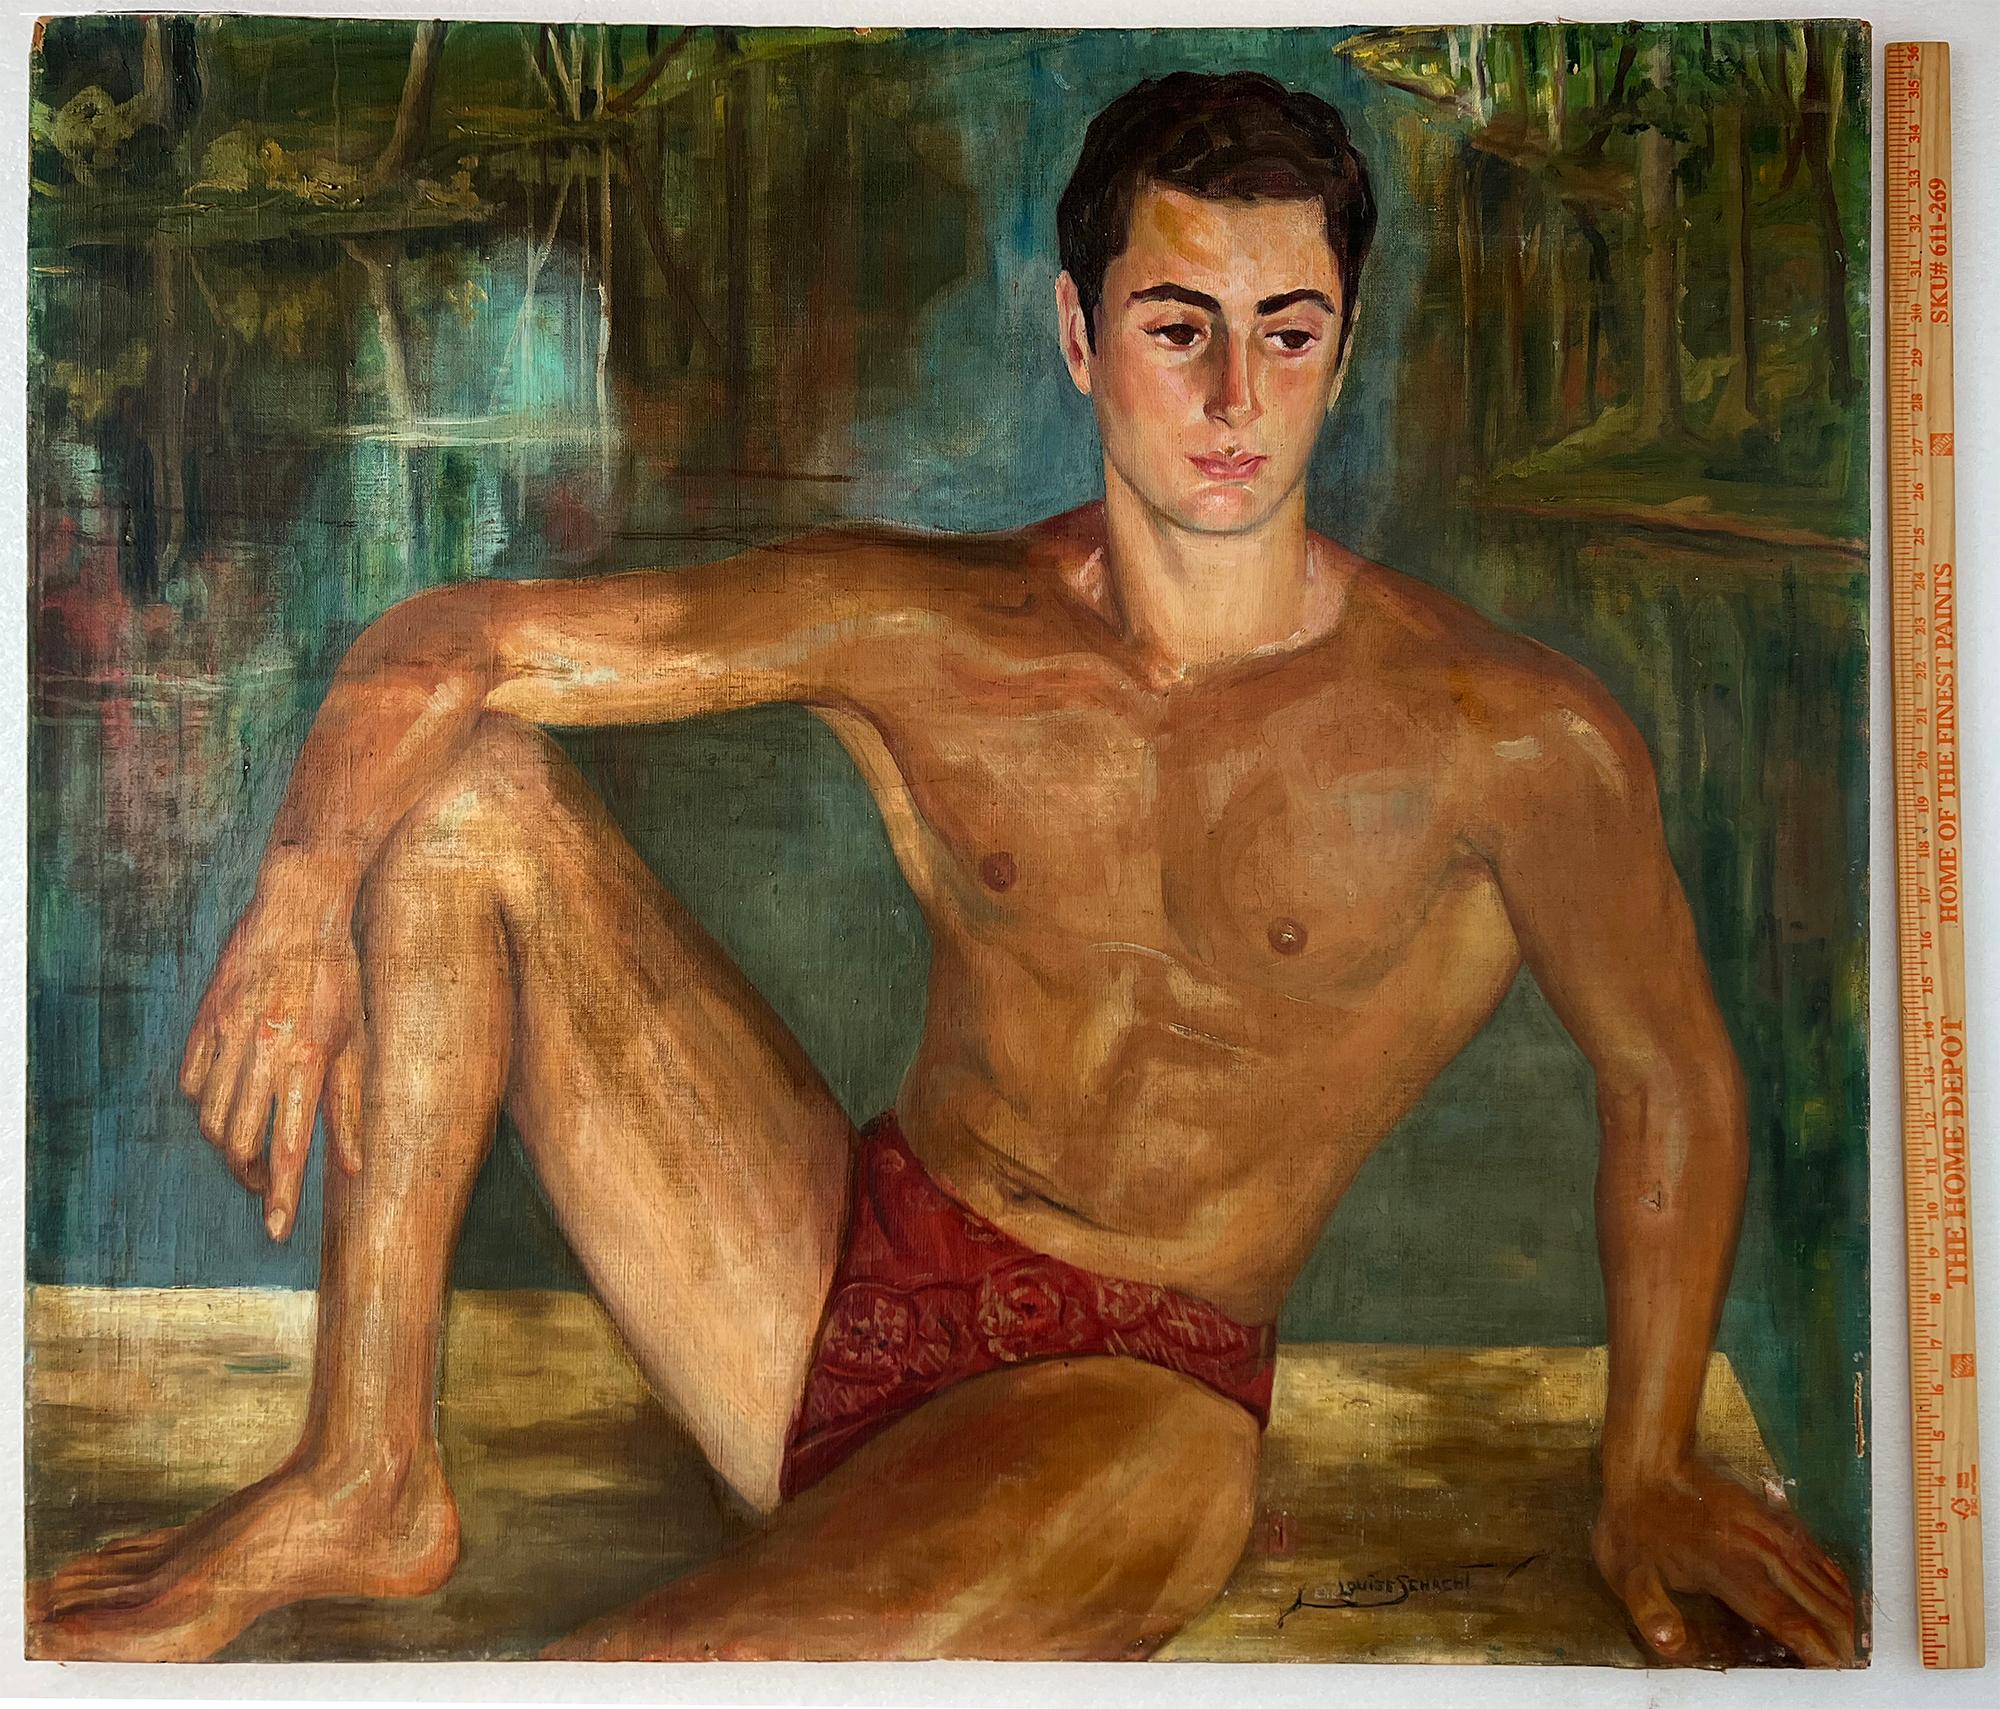 Nude Man In Bathing Suit,  Male Nude in Speedo, Gay art,  Sex appeal - Brown Nude Painting by Louise Schacht